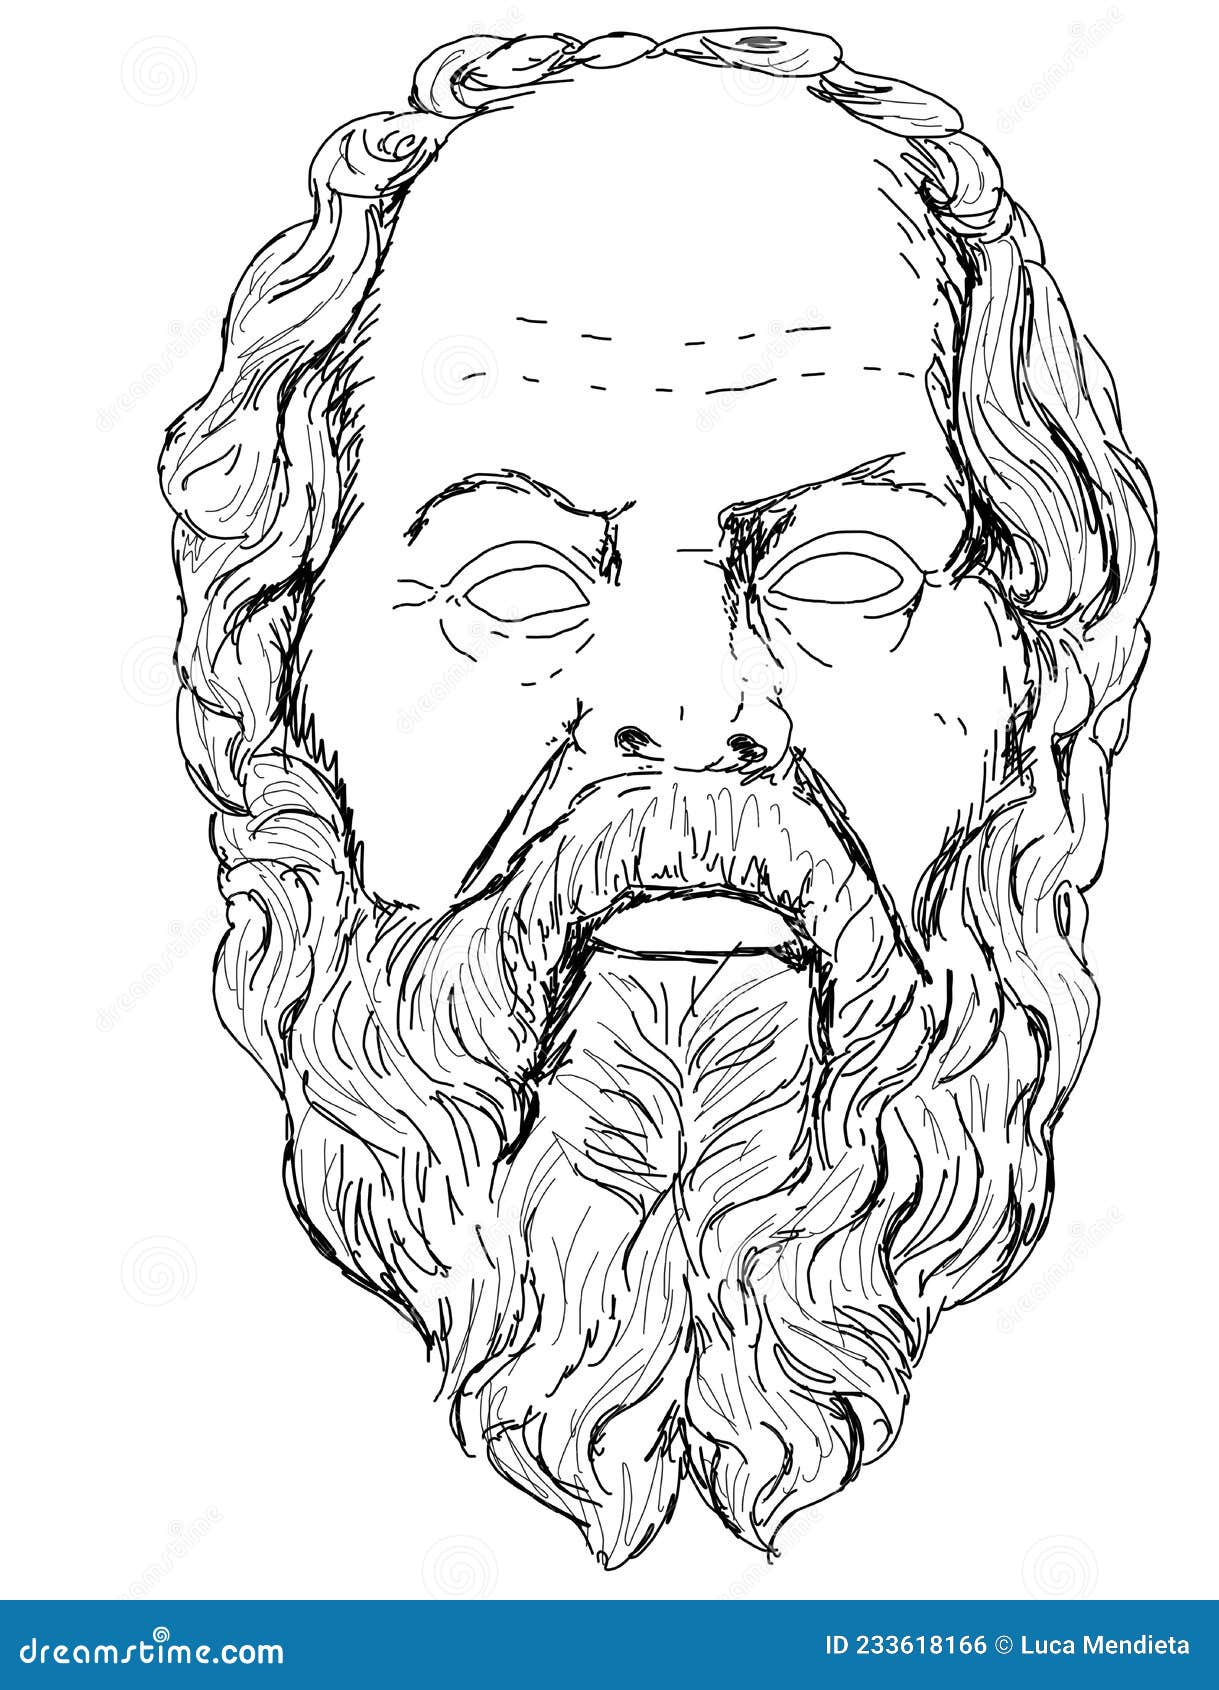 Realistic Illustration of the Face of the Greek Philosopher Socrates ...